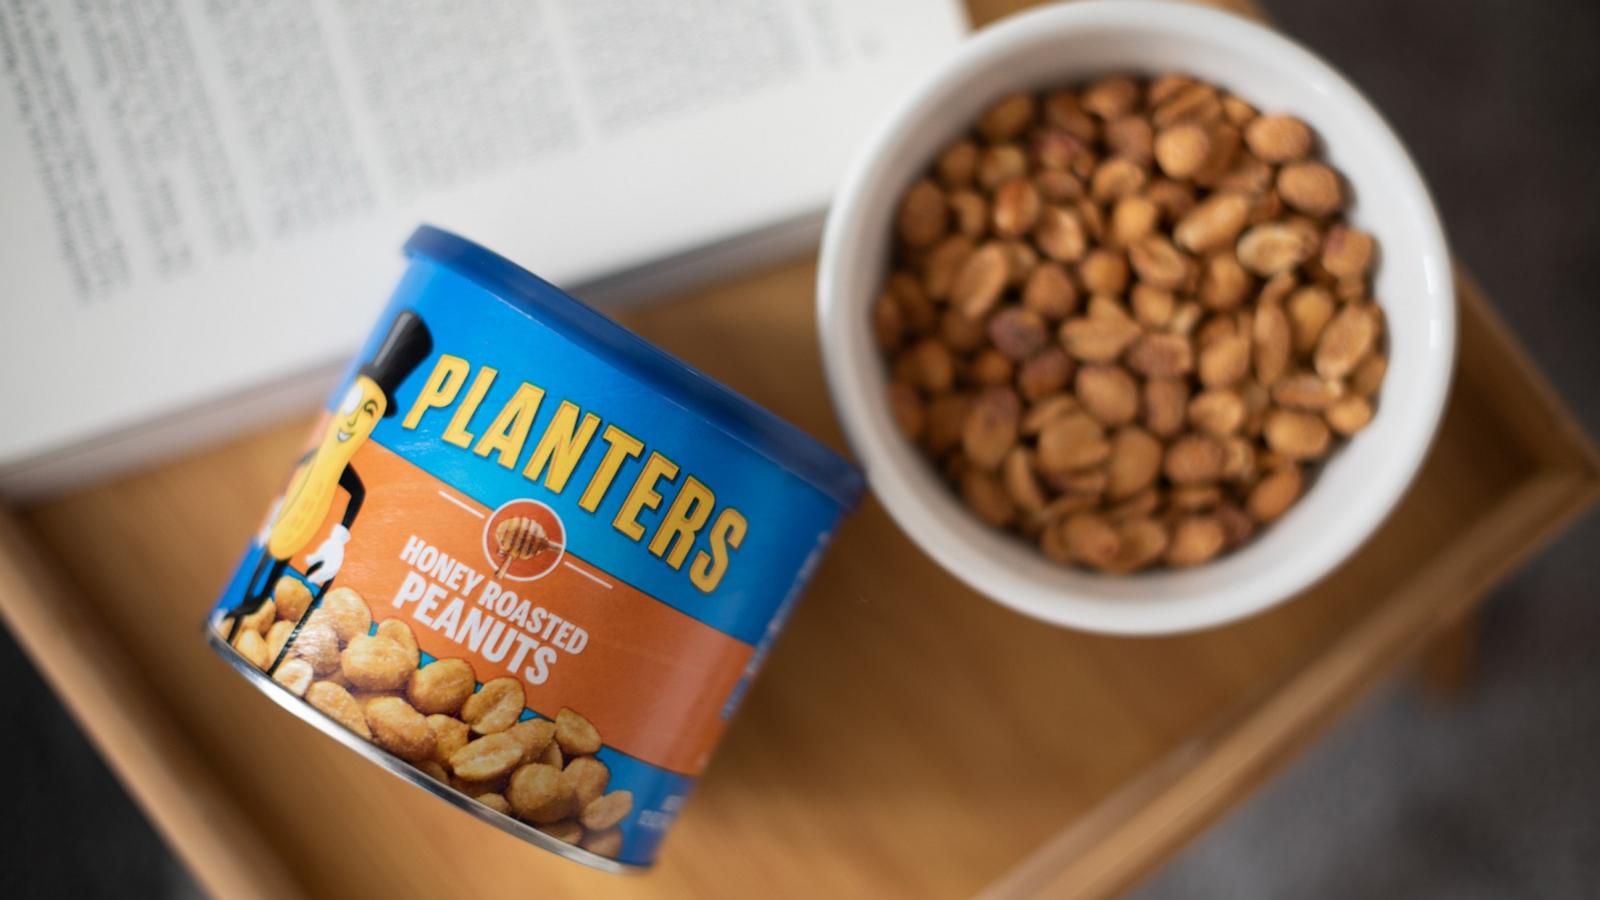 PHOTO: Hormel Foods initiated a voluntary recall on two Planters brand products for honey roasted peanuts and mixed nuts sold in 5 states.